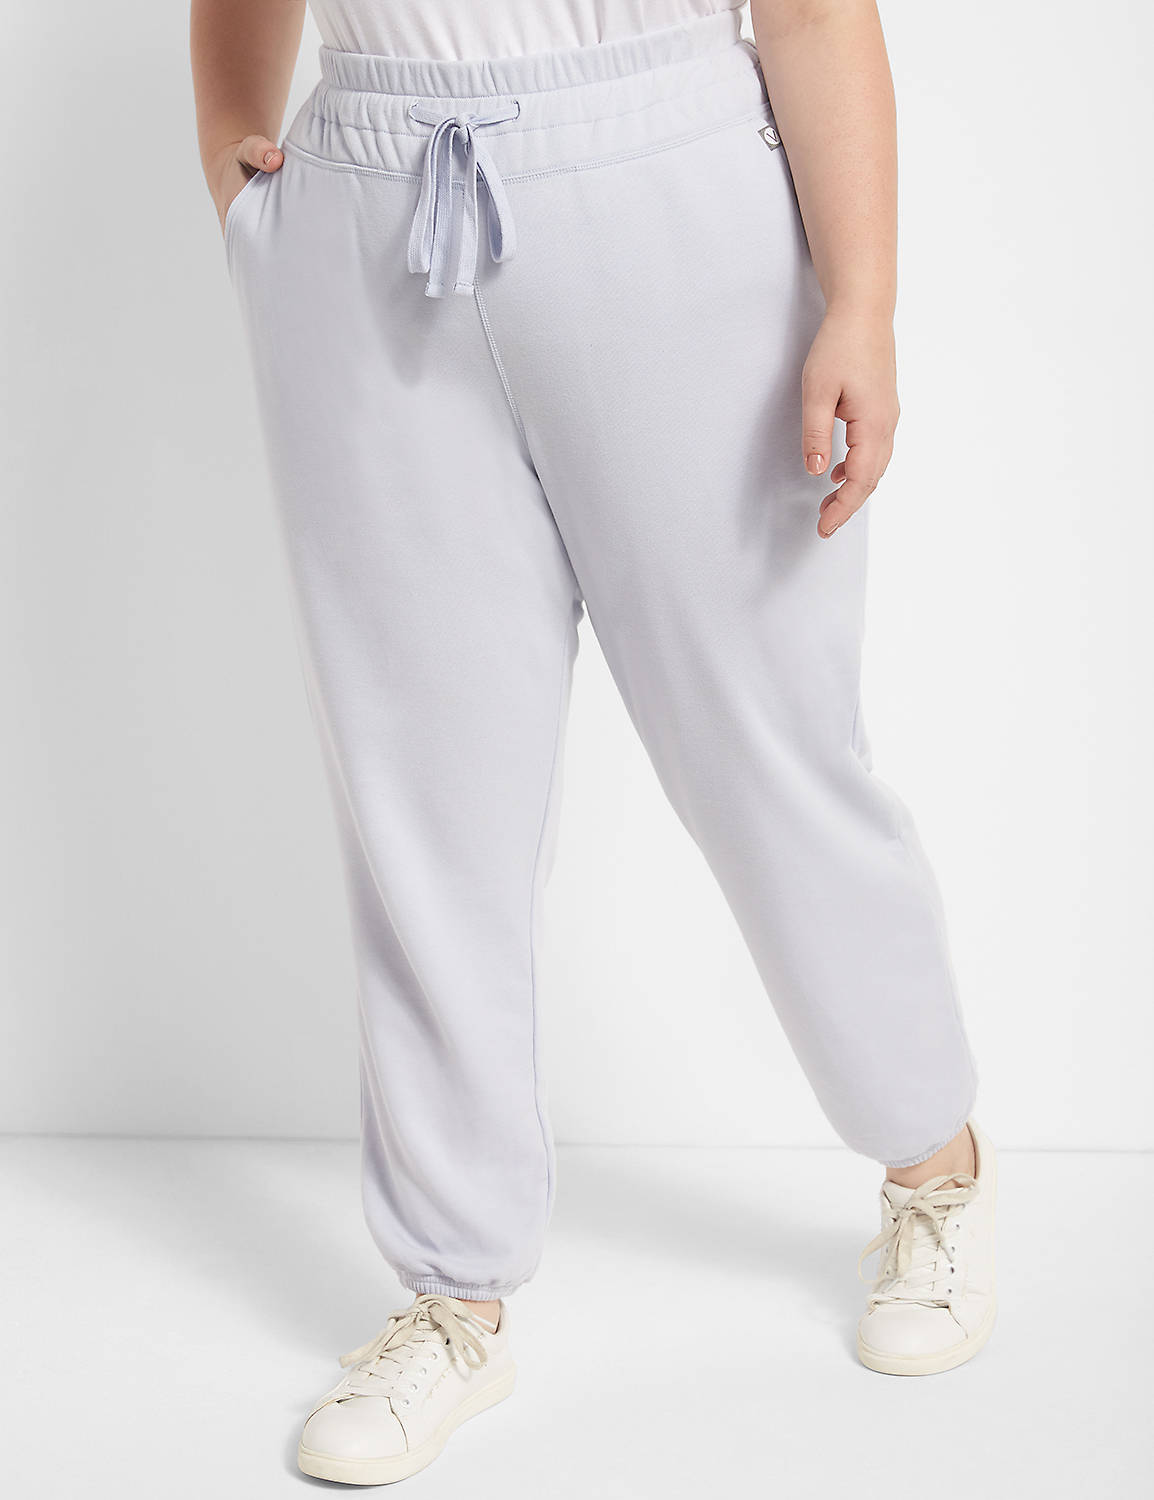 LIVI French Terry Jogger Product Image 1